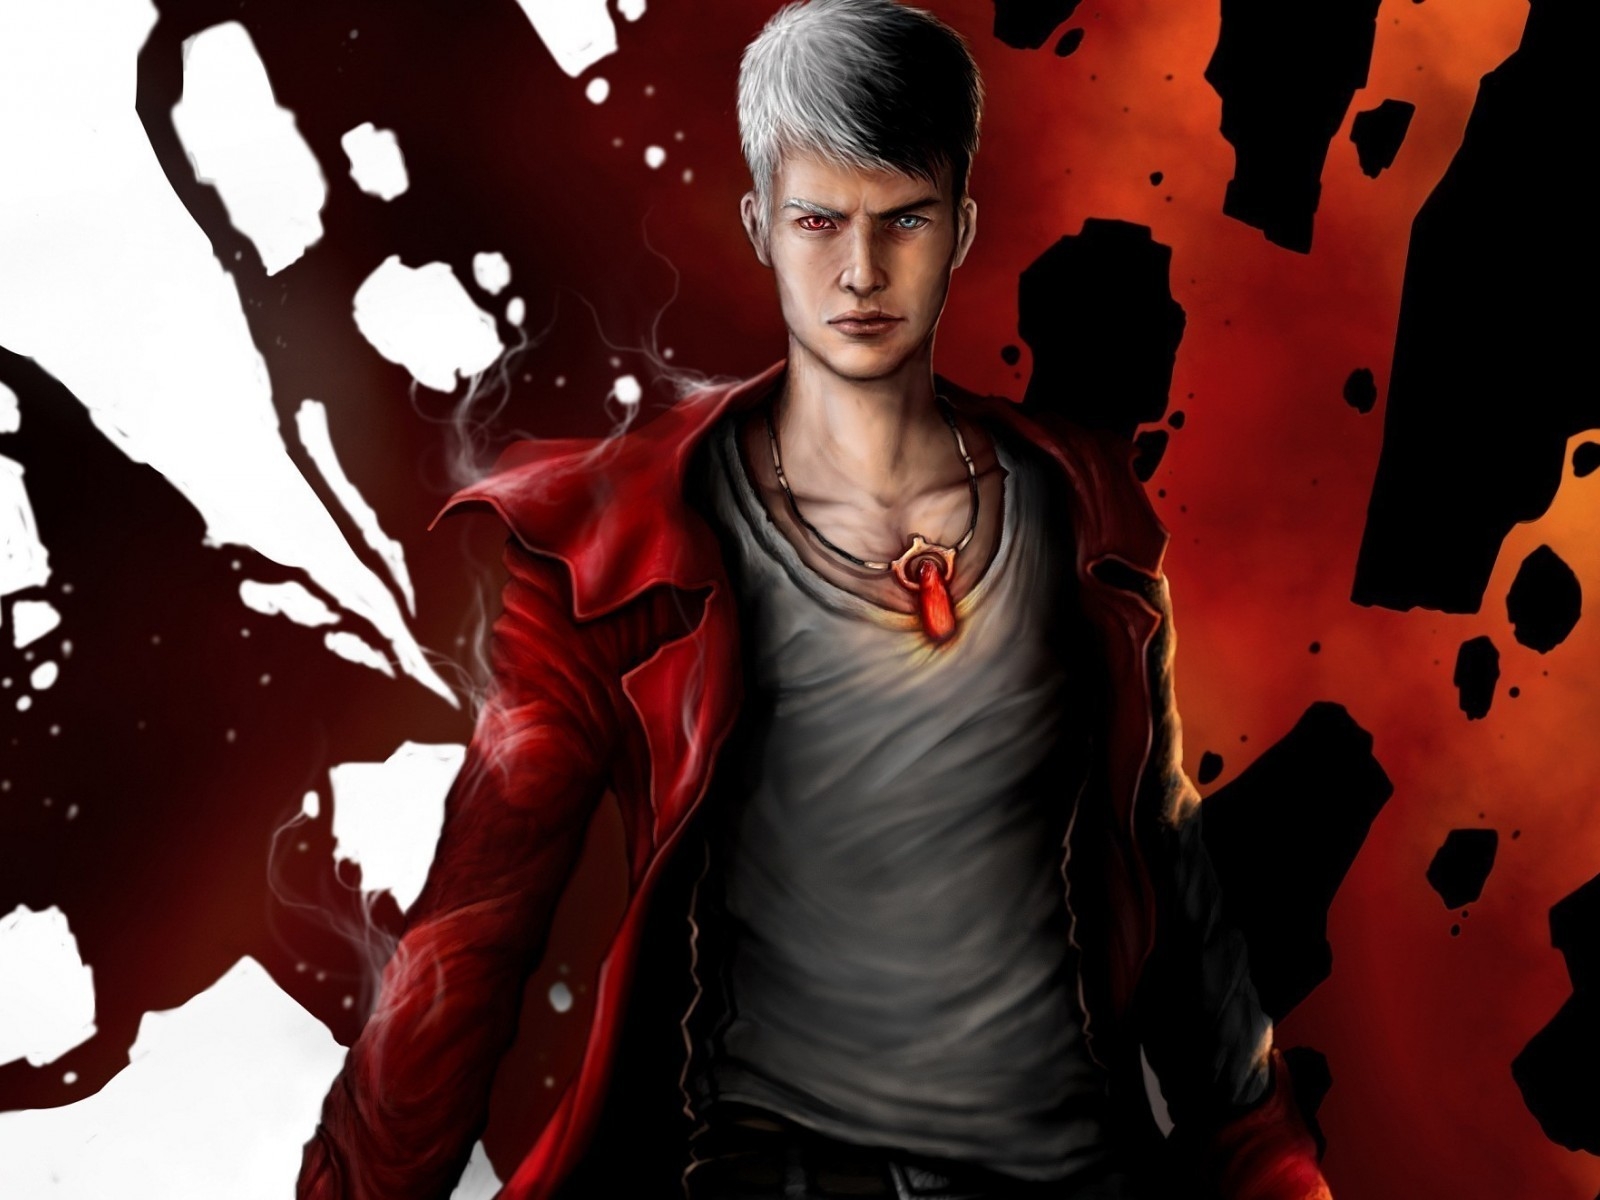 Dante from Devil May Cry for 1600 x 1200 resolution